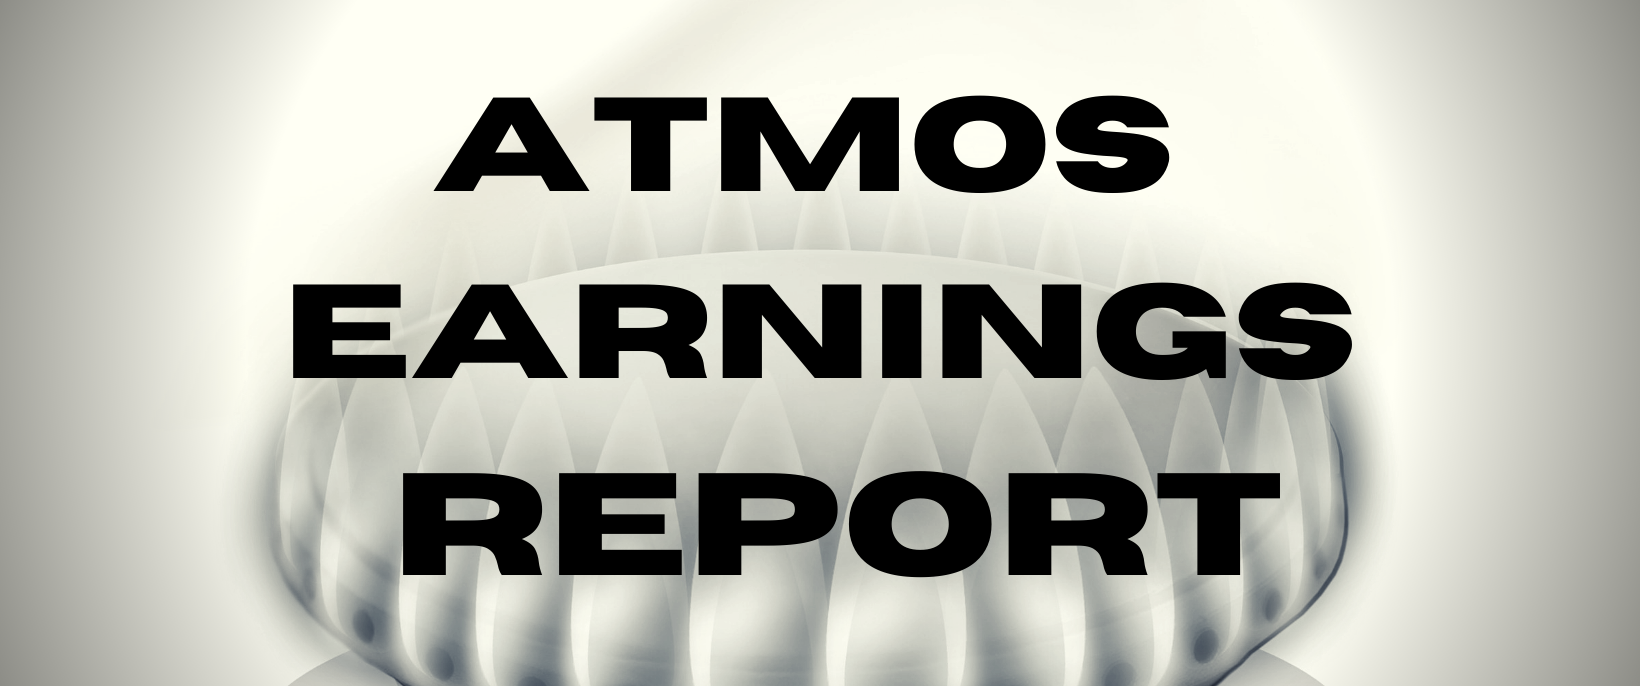 Atmos Reports Quarterly, Six-Month Financial Results, plus Interim Rate Adjustments